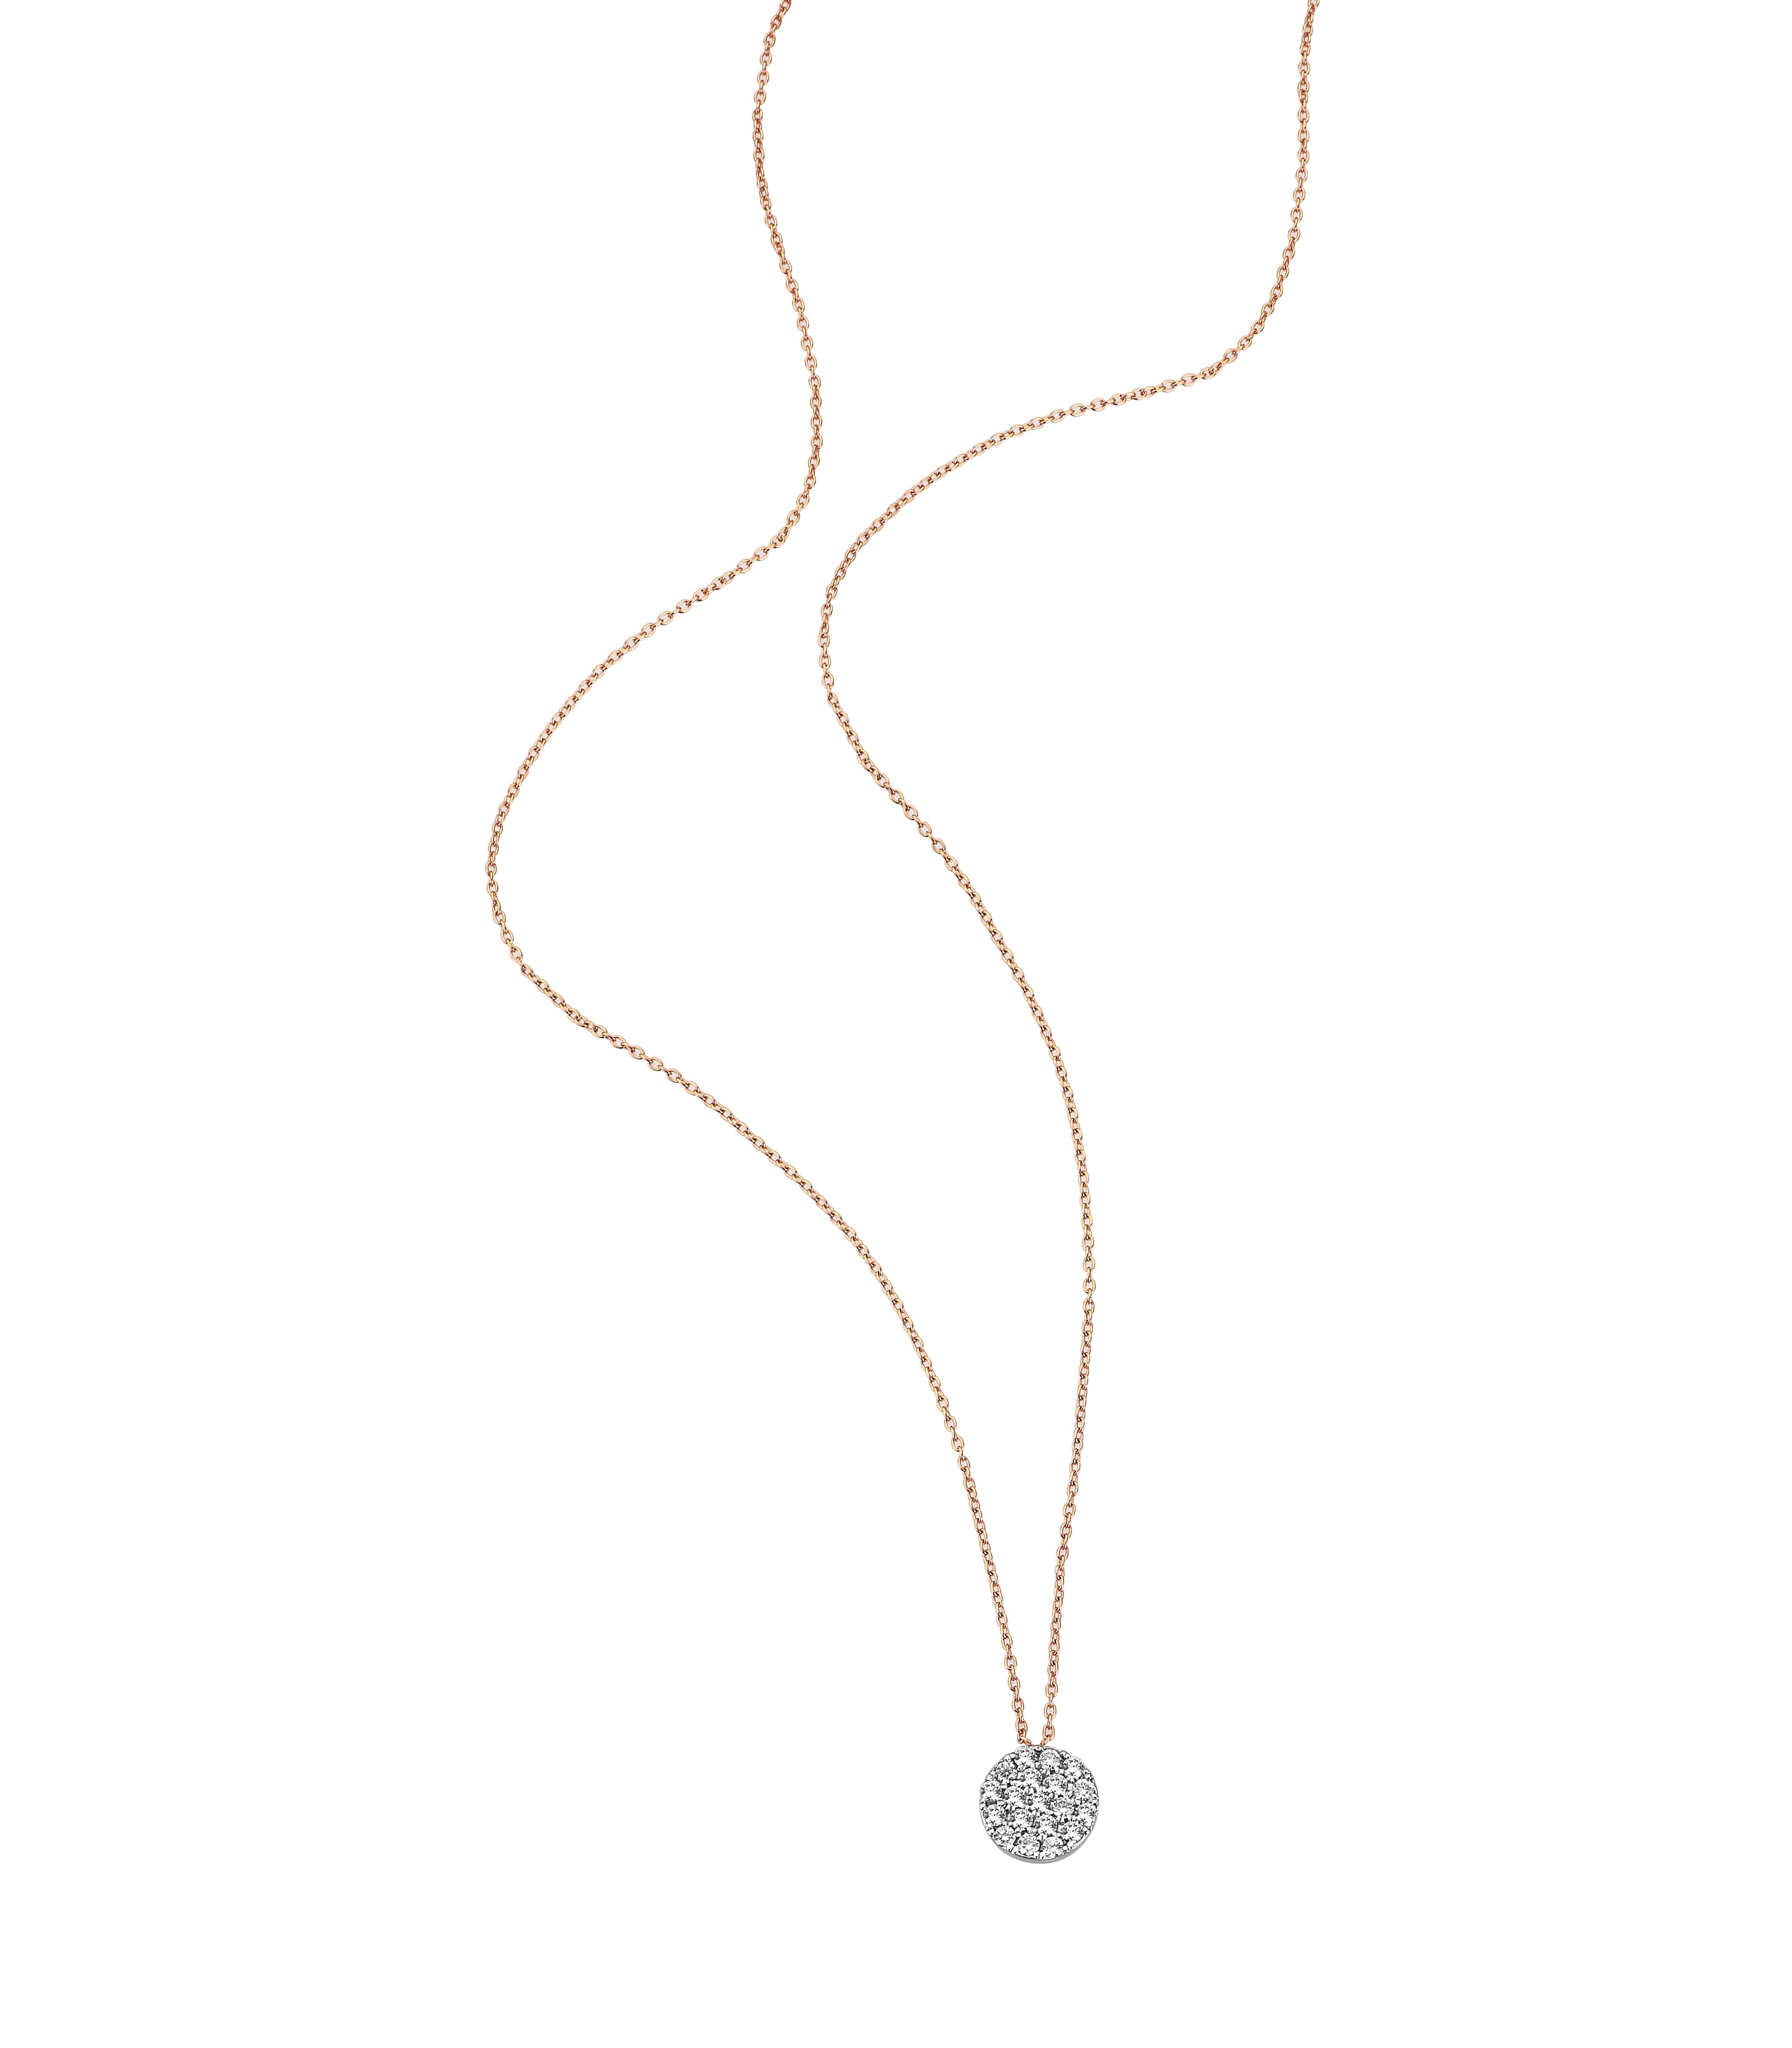 Pave Round Diamond Necklace in Rose Gold - Her Story Shop